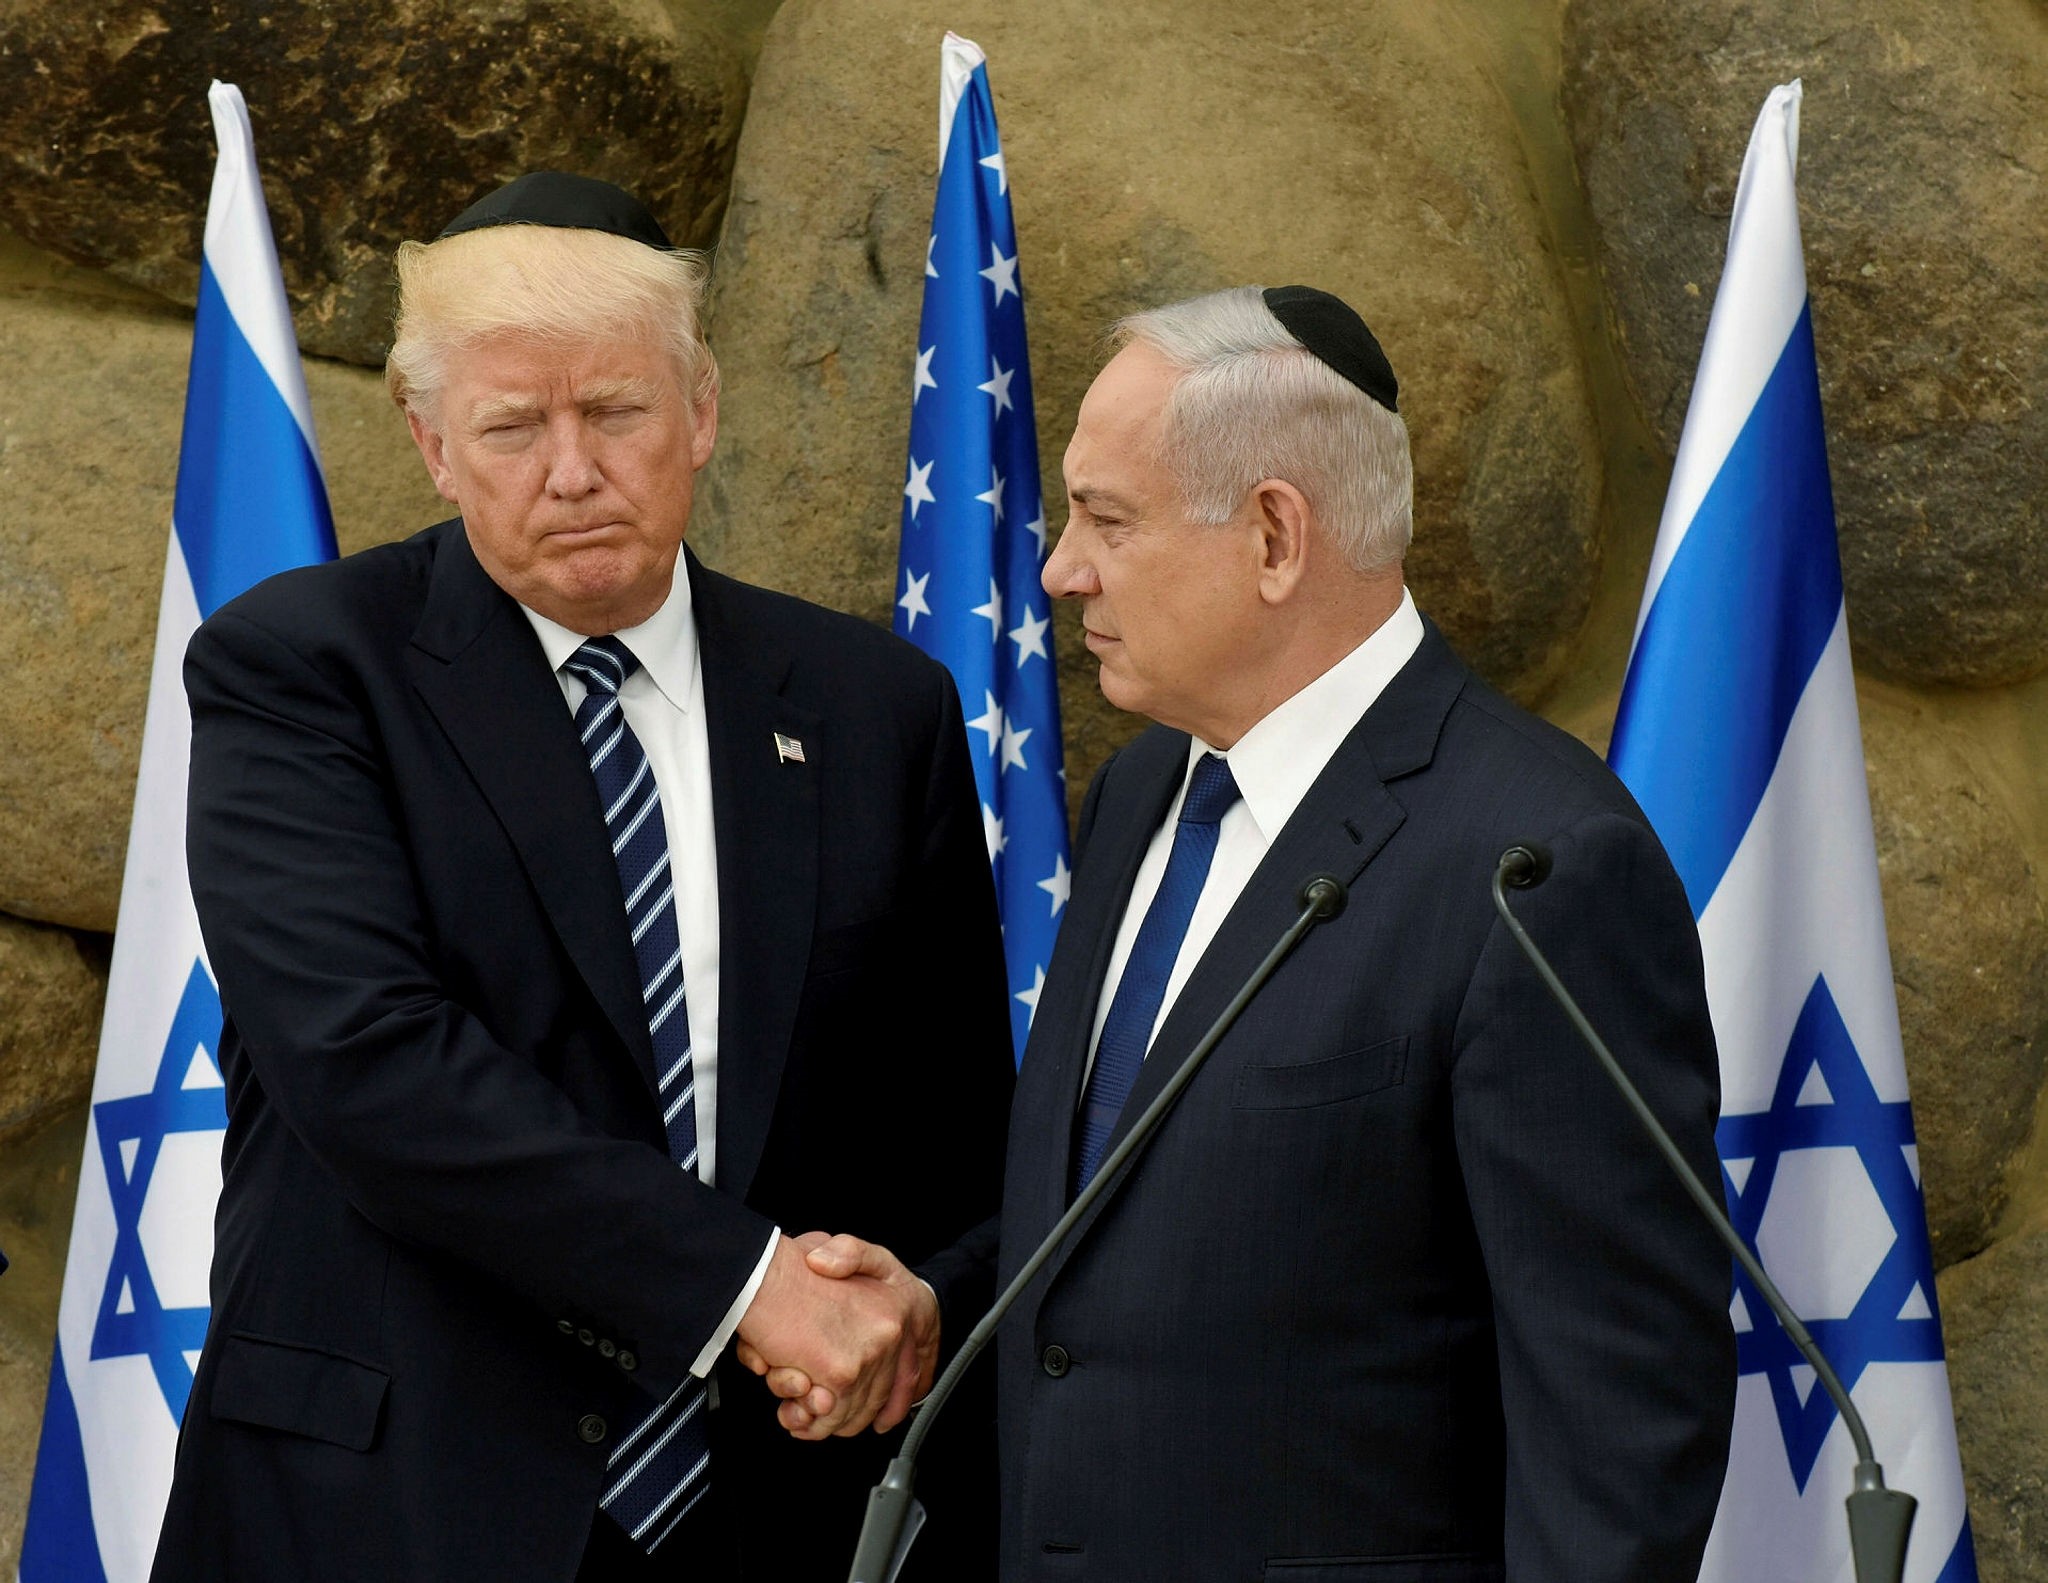 US President Donald Trump (L) and Israeli PM Benjamin Netanyahu shake hands, during a visit to the Yad Vashem Holocaust Memorial museum, commemorating the six million Jews killed by the Nazis during WW II, Jerusalem, 23 May 2017 (EPA Photo)